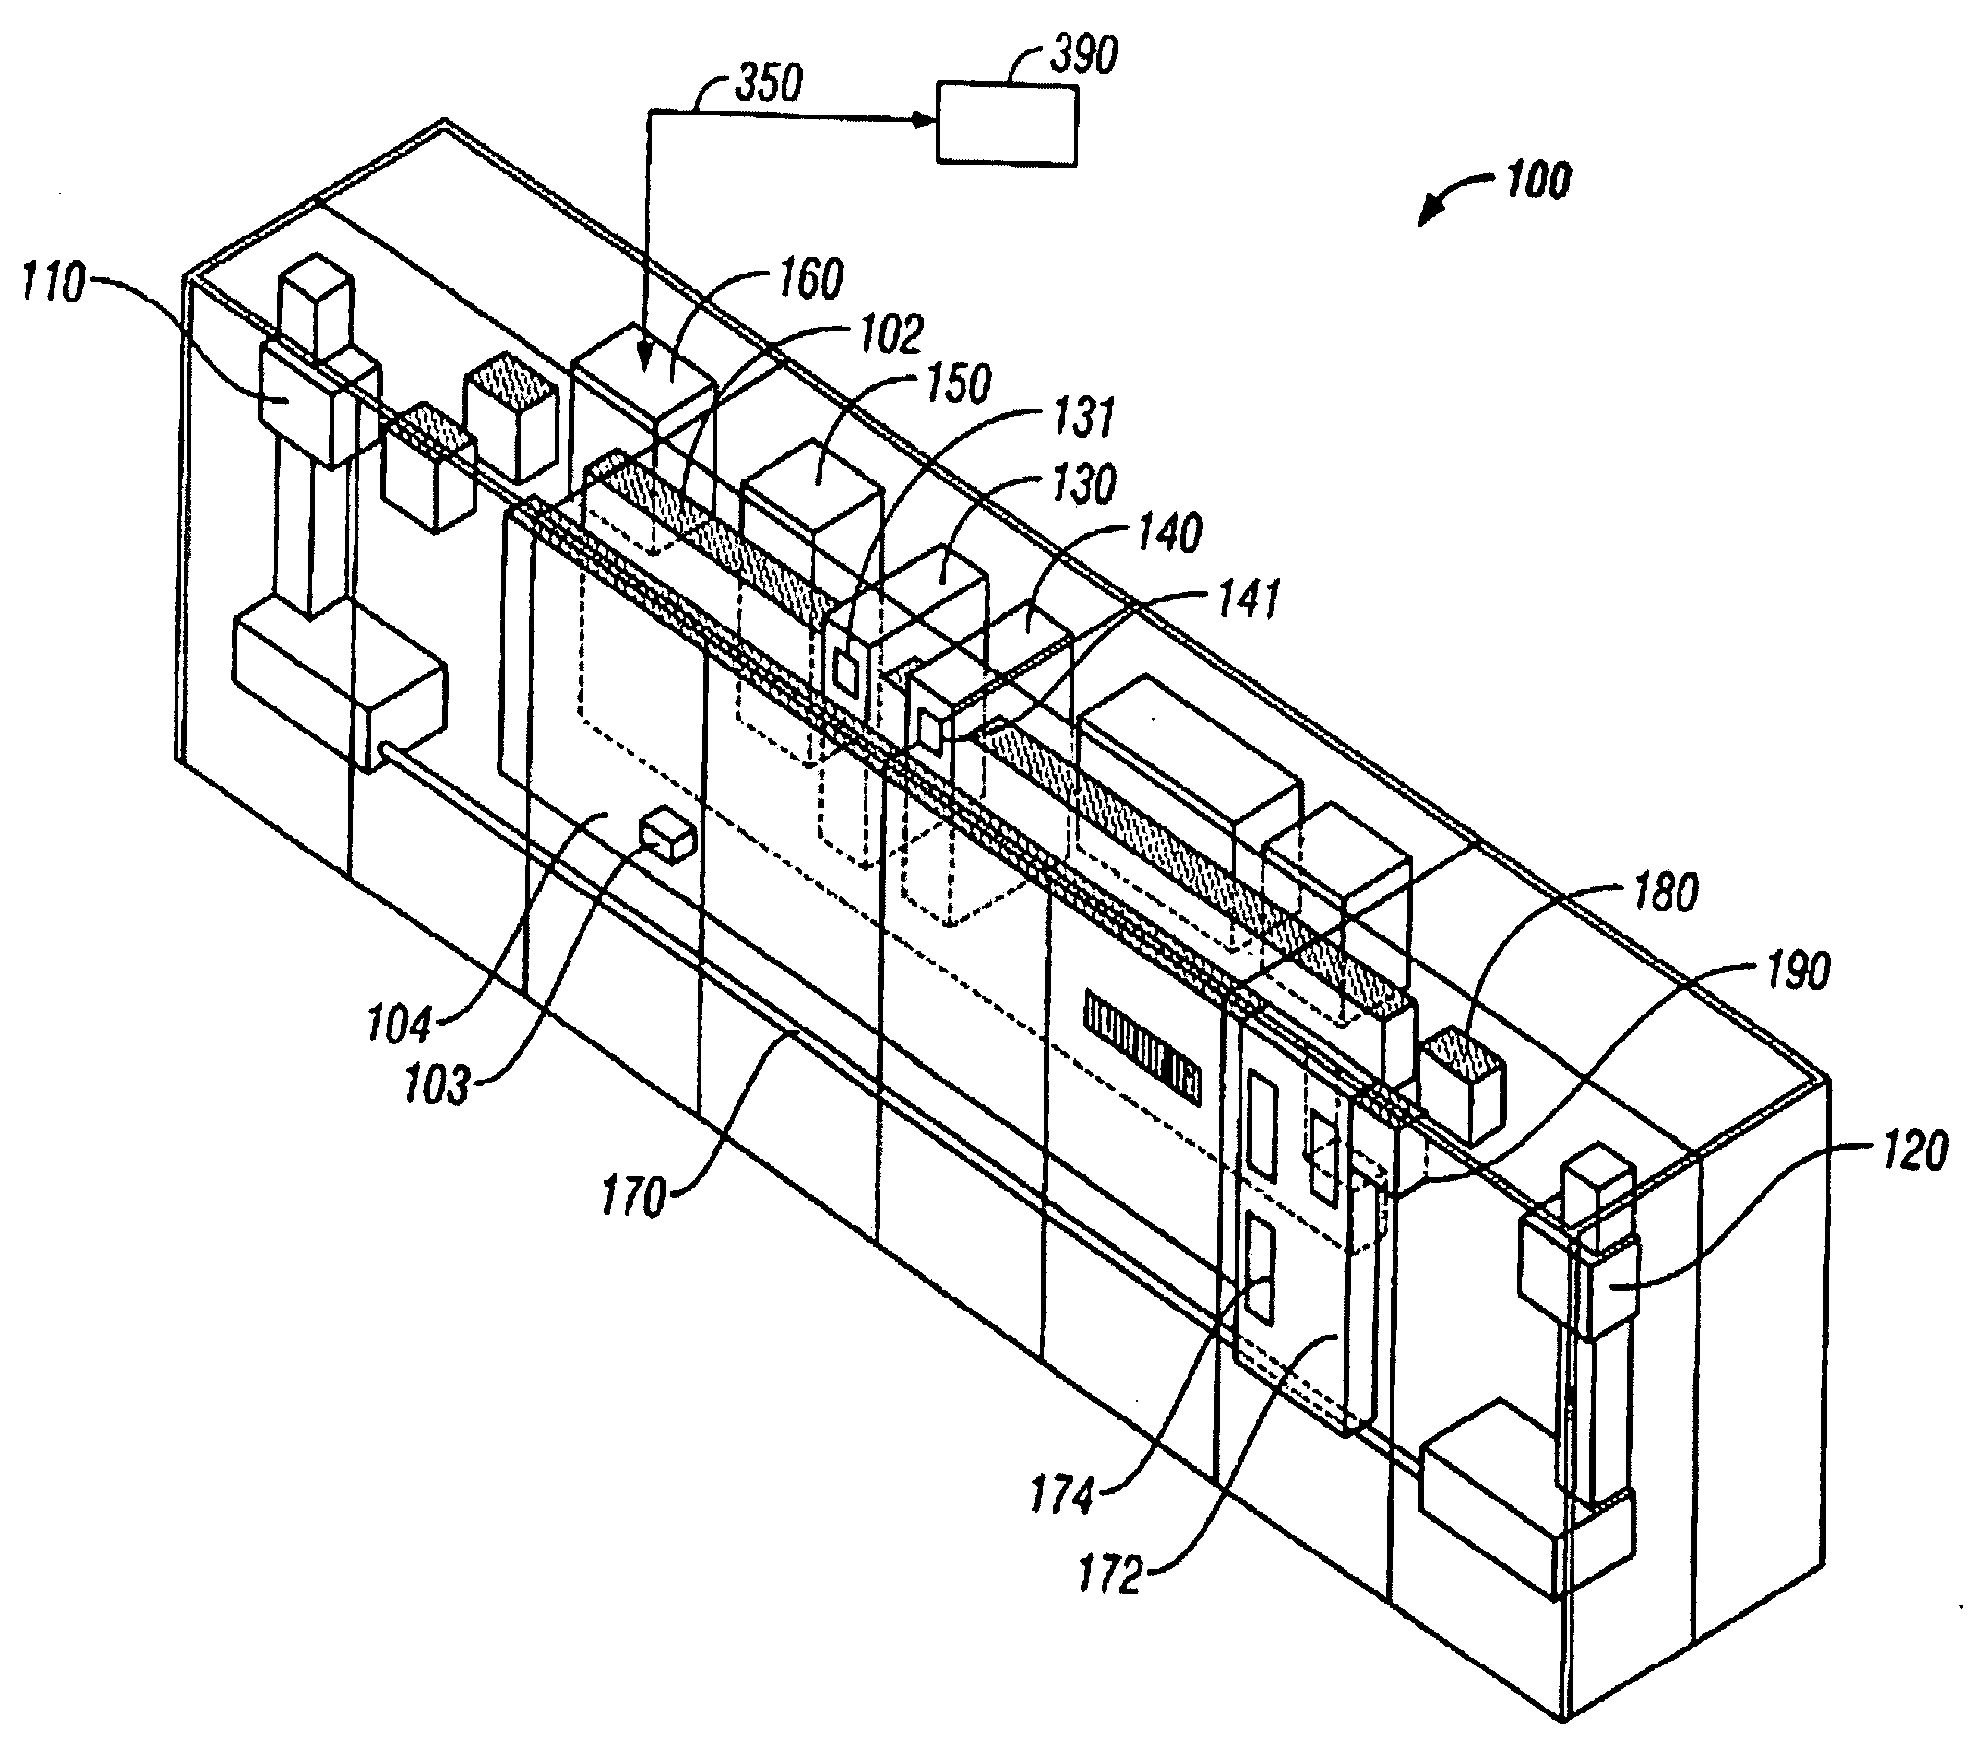 Media cartridge storage device for an autoloading data storage and retrieval system